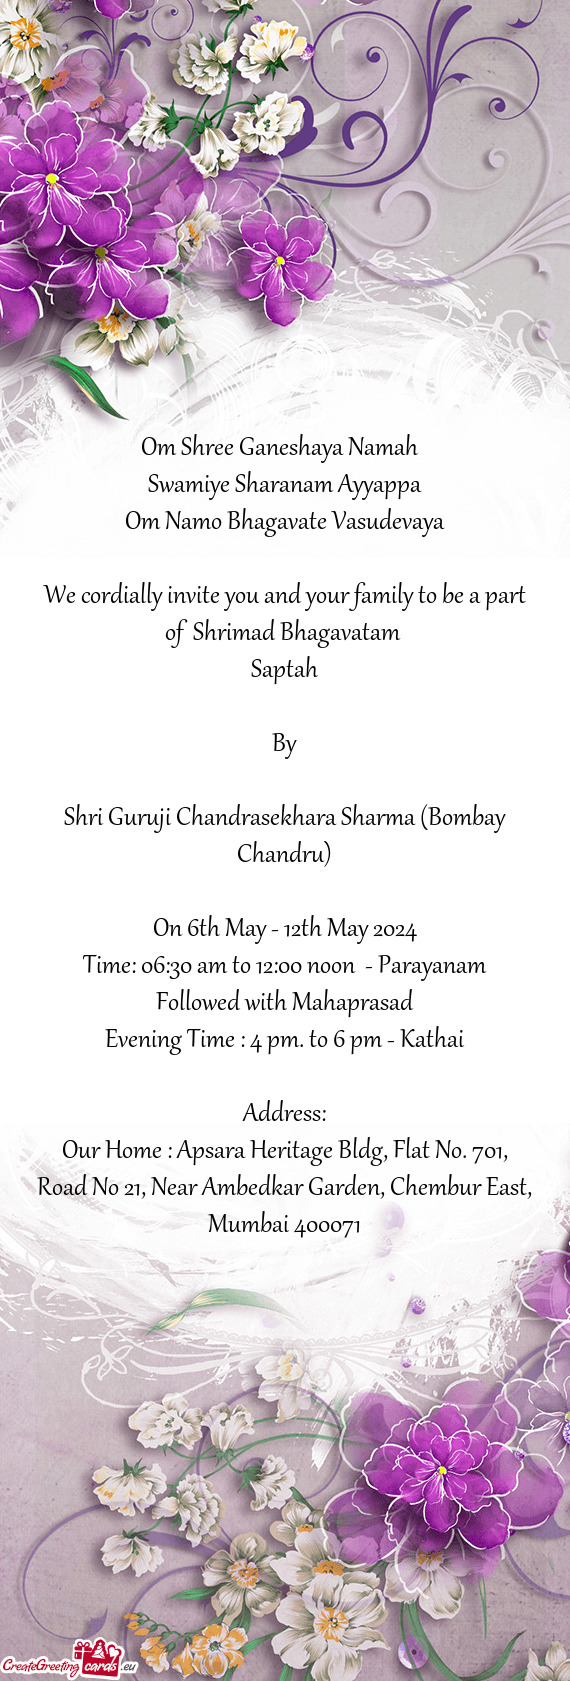 We cordially invite you and your family to be a part of Shrimad Bhagavatam